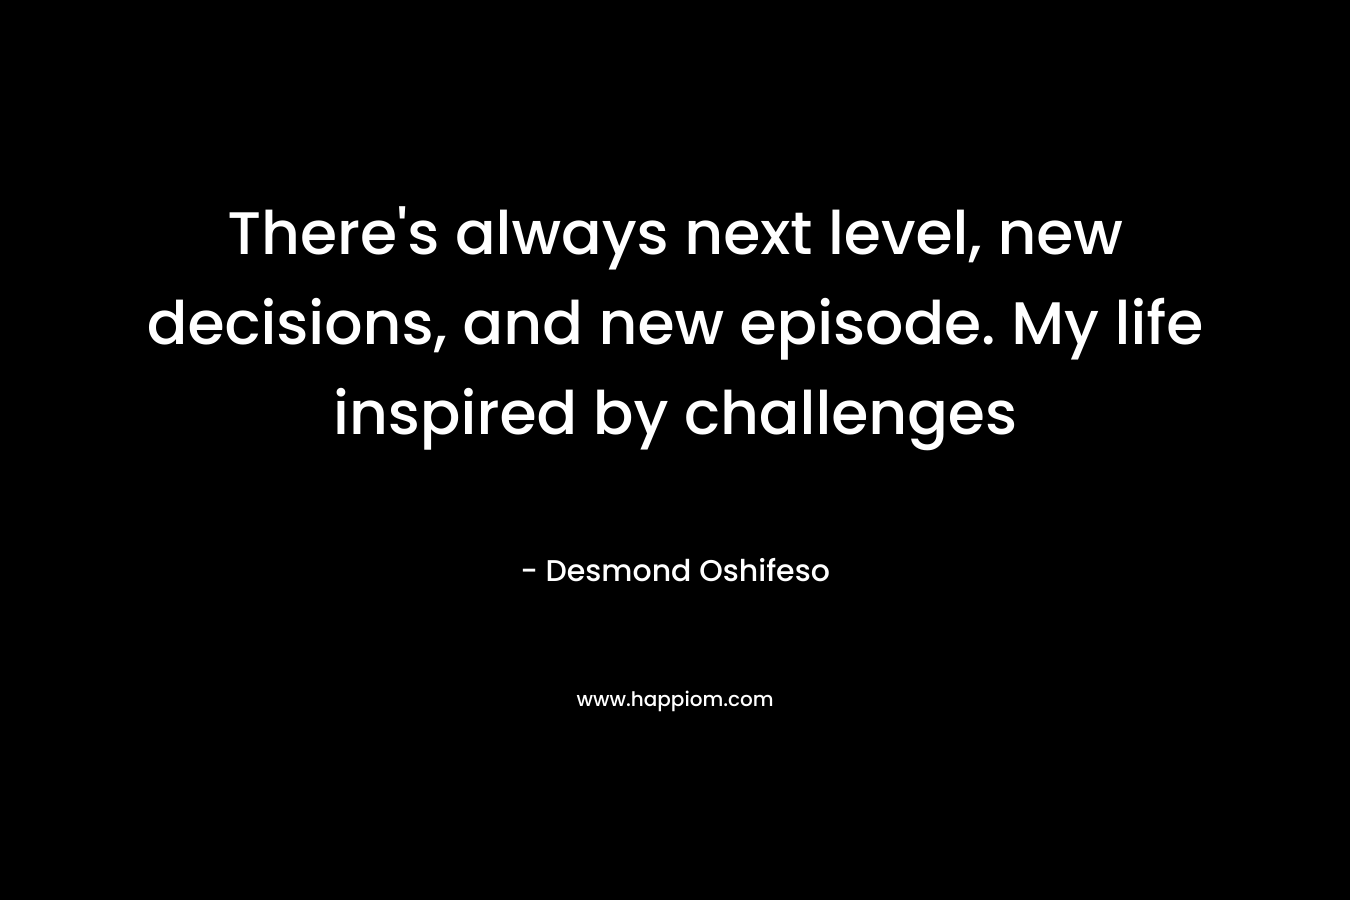 There’s always next level, new decisions, and new episode. My life inspired by challenges – Desmond Oshifeso